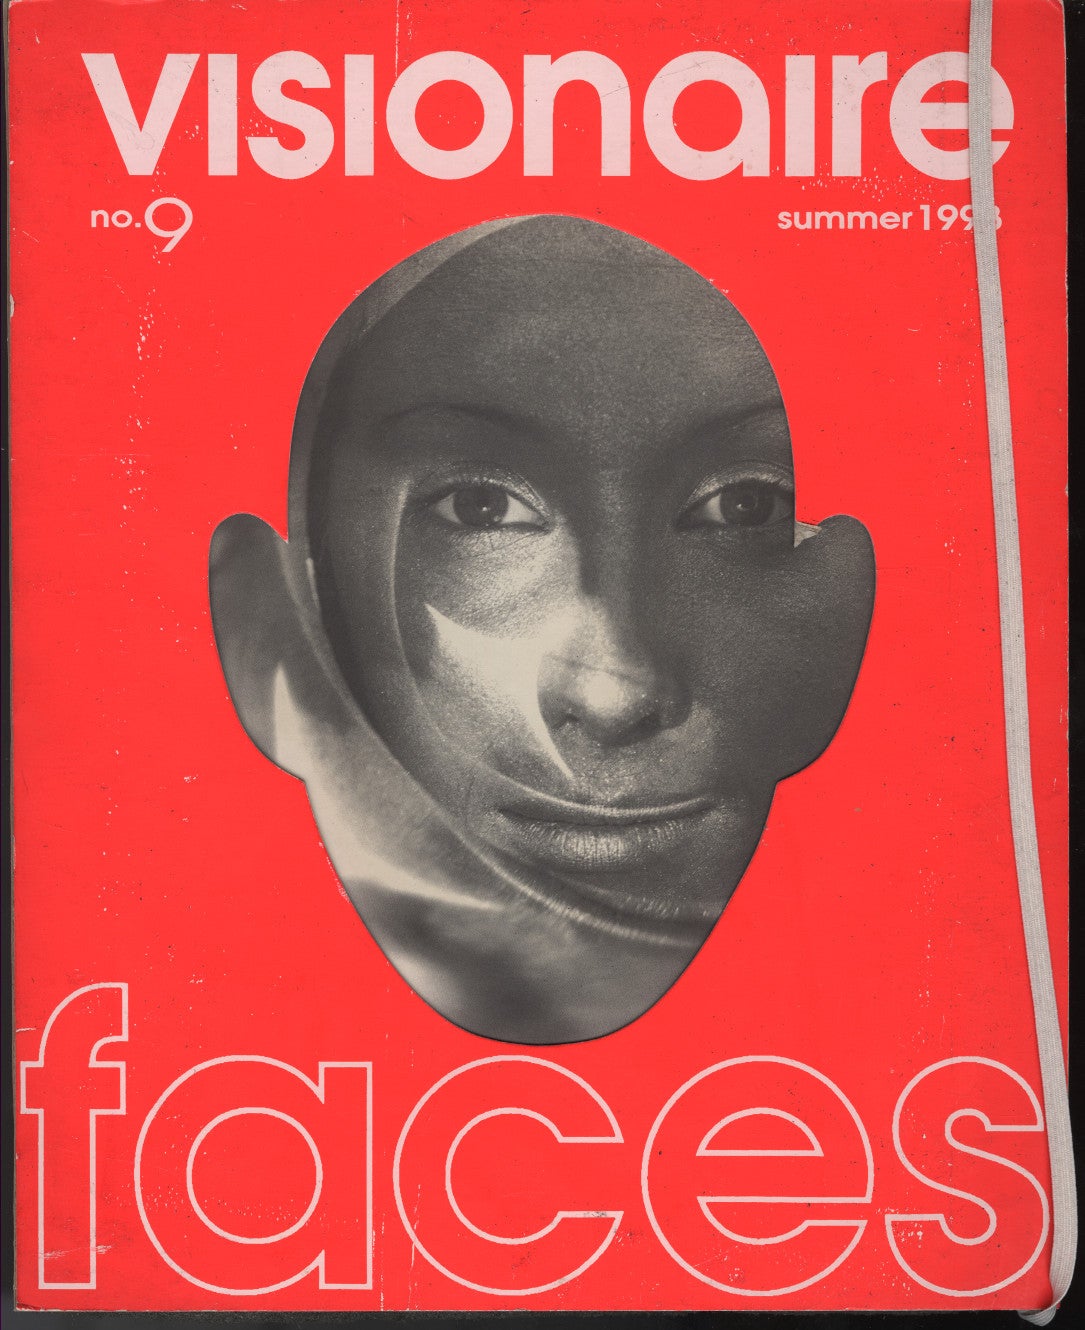 9V☆/visionaire ヴィジョネア THE ORIENT No.8 Spring 1993 限定 / 1